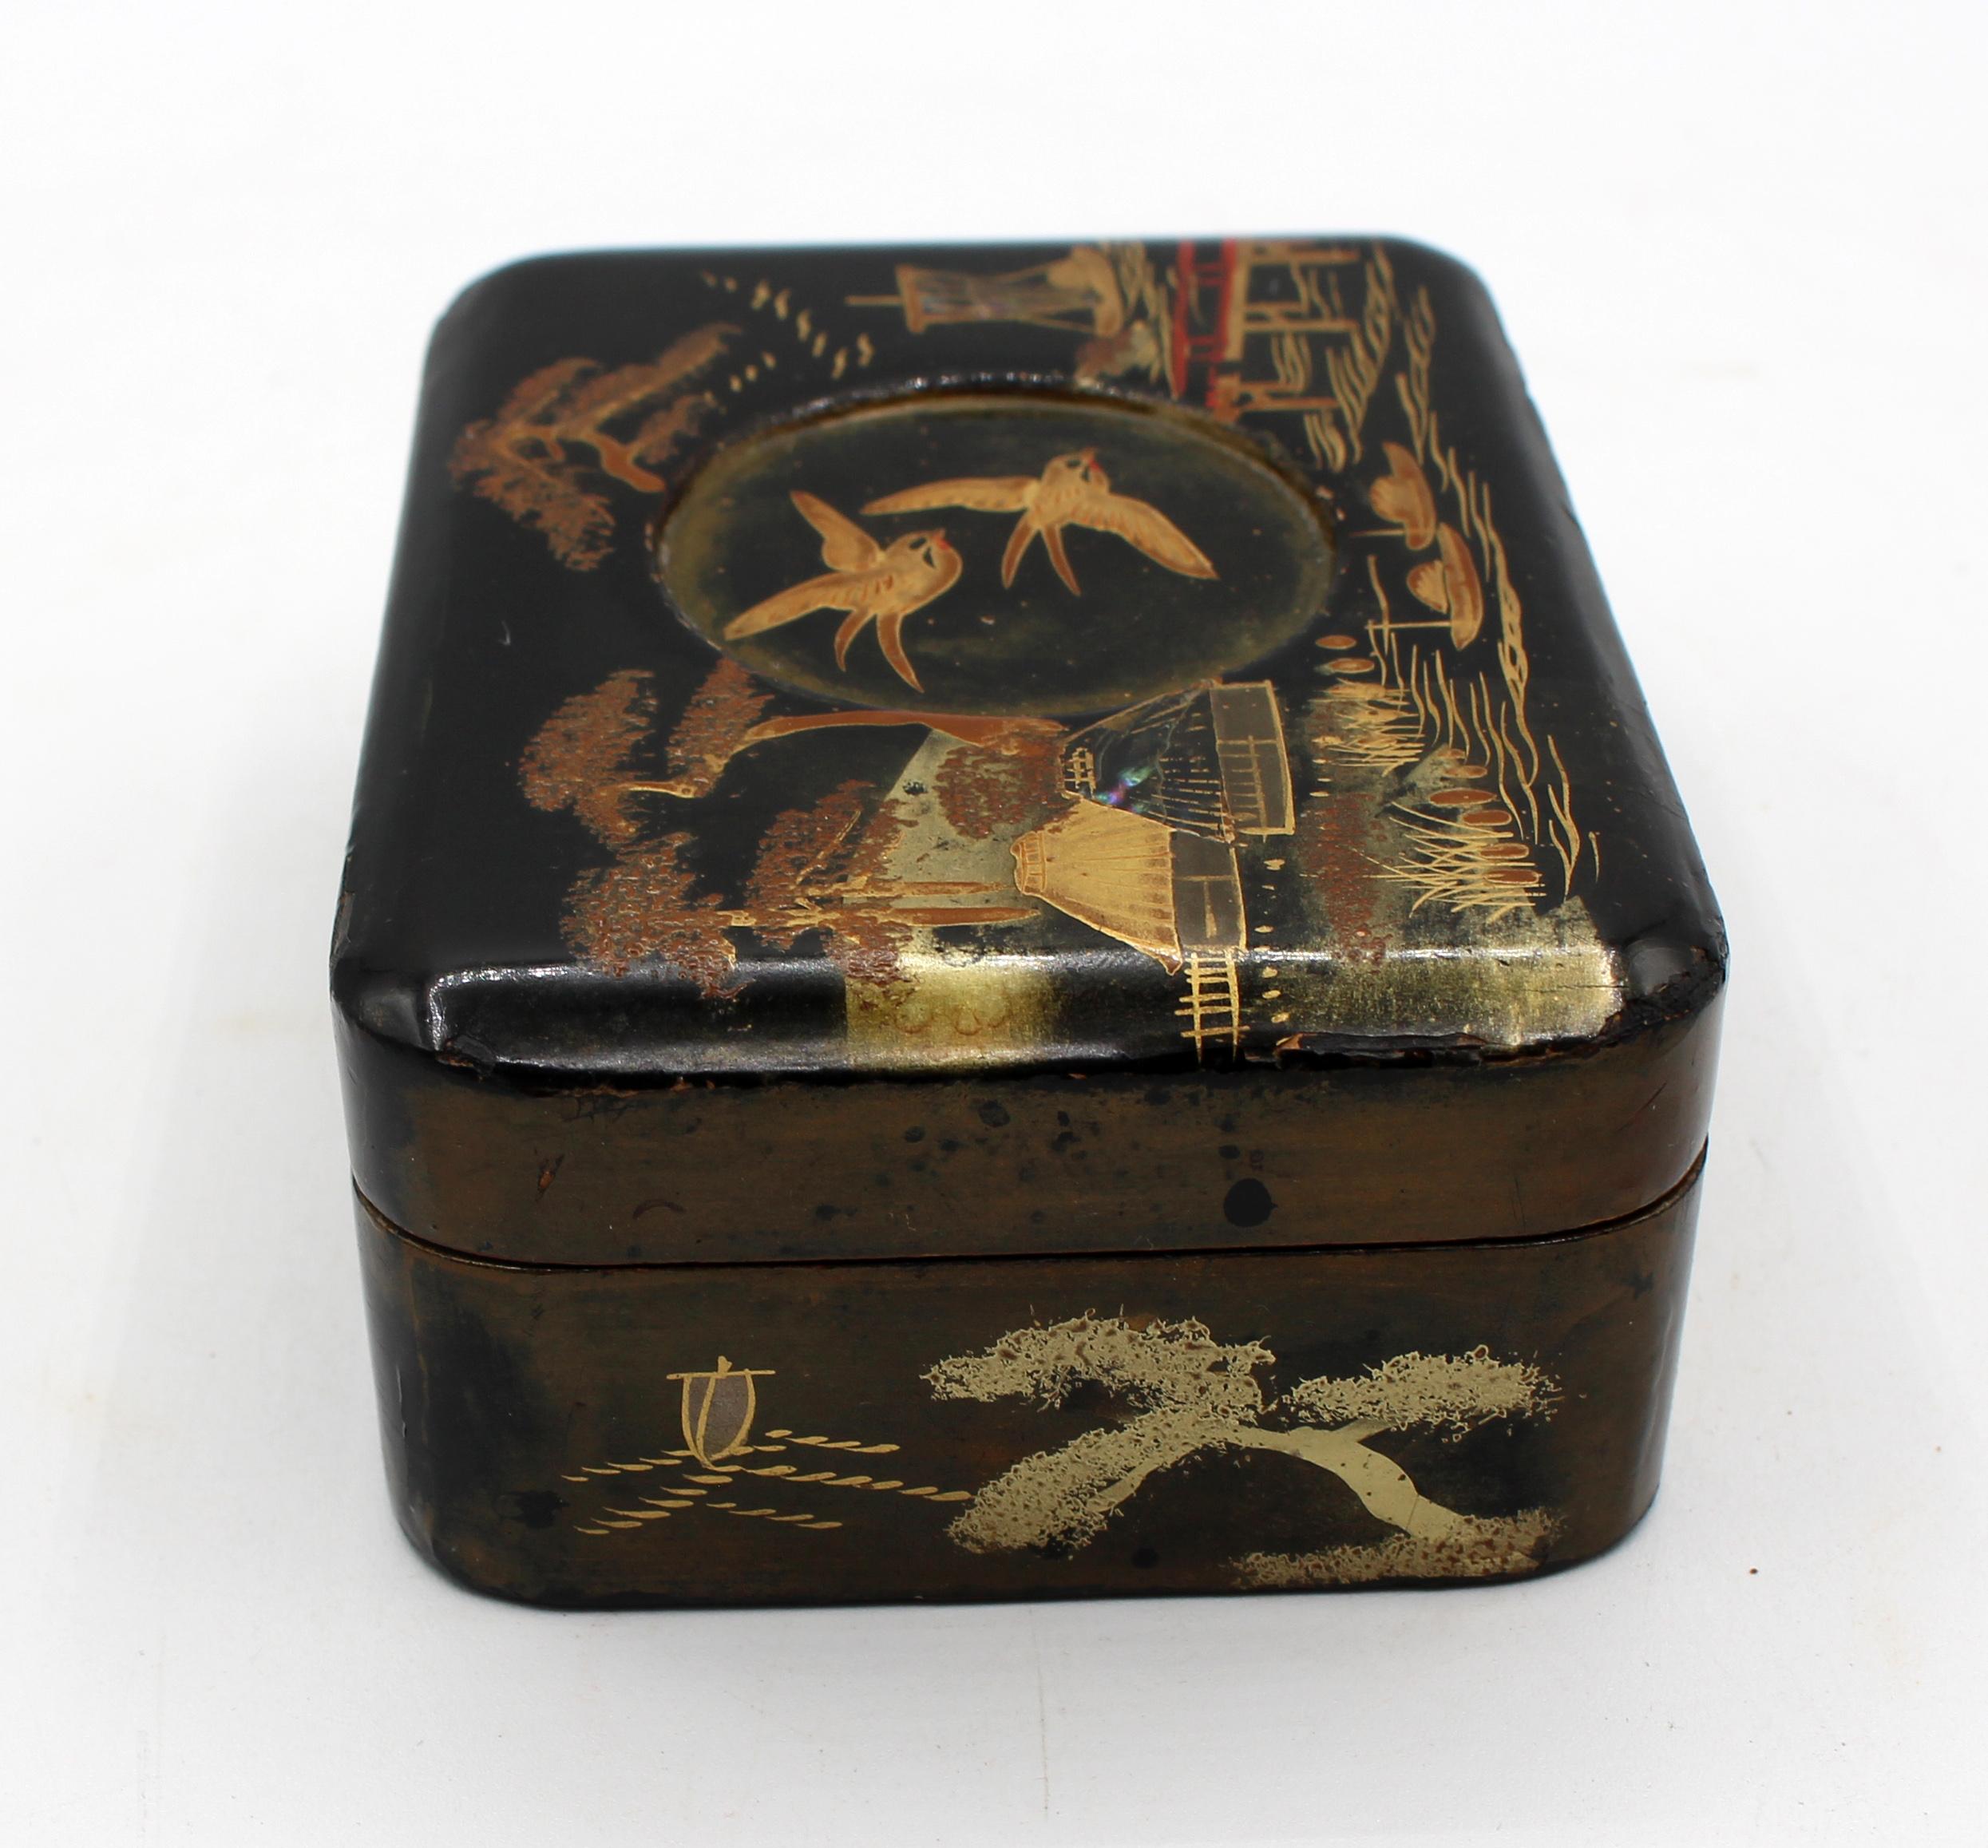 Meiji period small lacquer box with hinged lid, Japanese. Finely decorated - bits of abalone inlay add sparks in several areas. The recessed circle contains swallows in flight. Fine gilding highlights the raised lacquer work of several types.
4 5/8